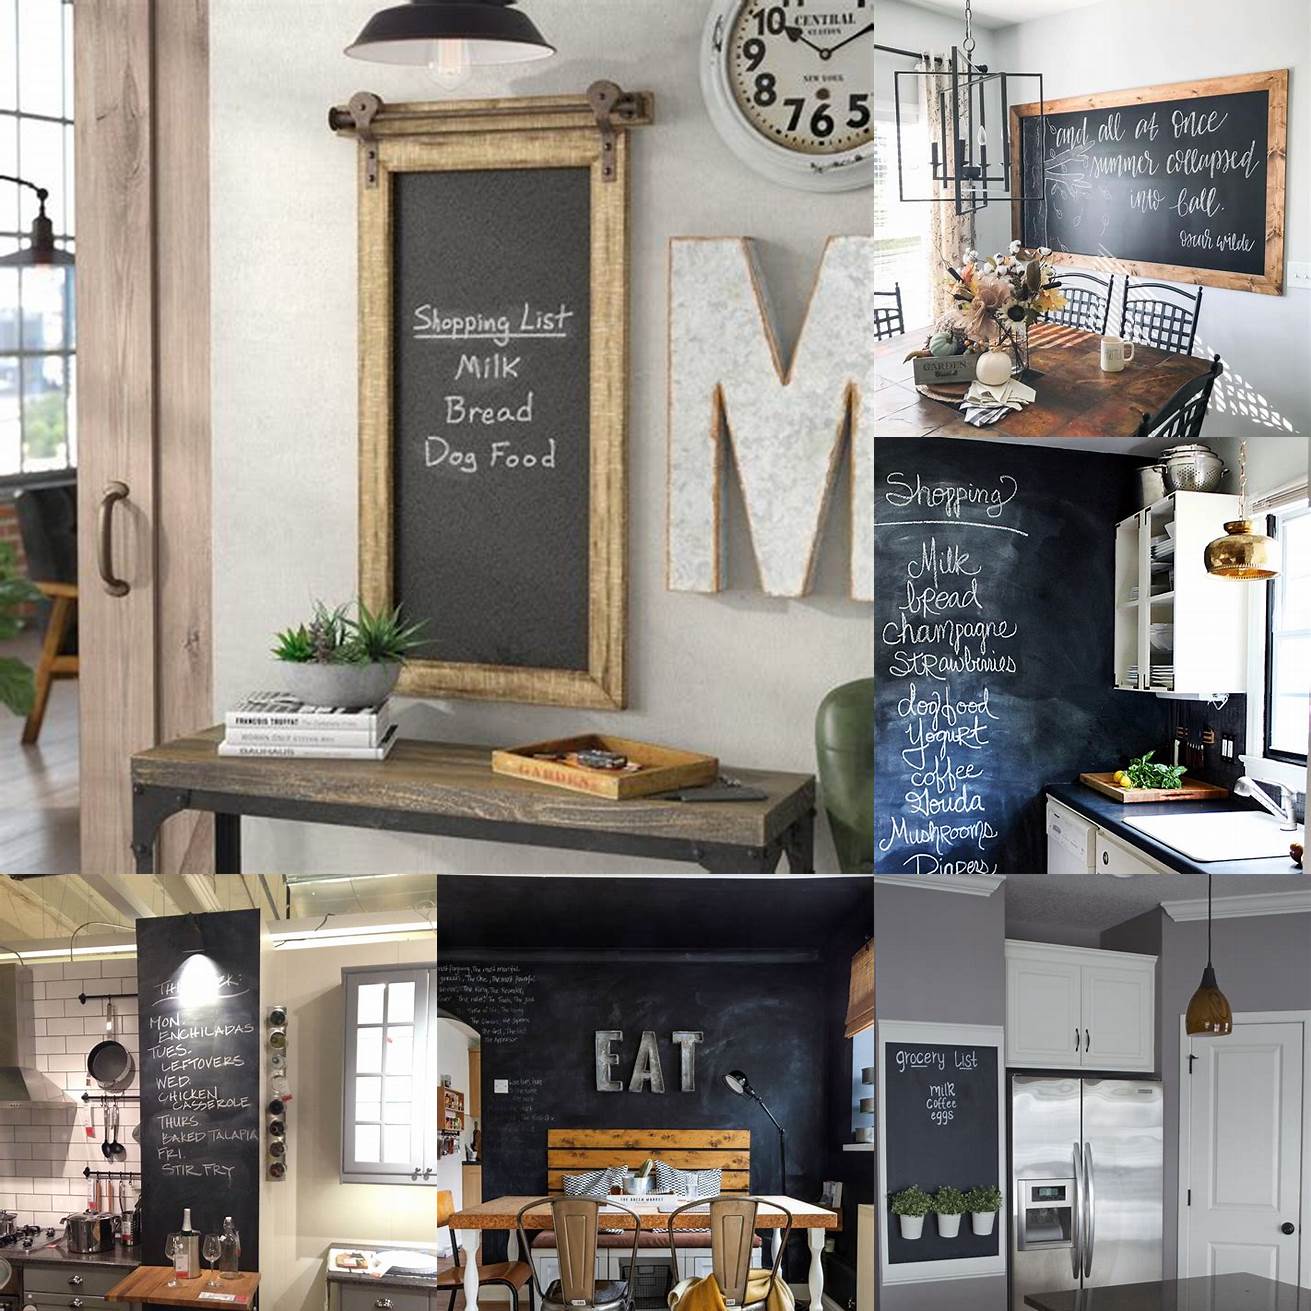 1 Wall-Mounted The most common type of kitchen chalkboard is the wall-mounted version This can be hung on a wall or placed on an easel and is usually larger in size